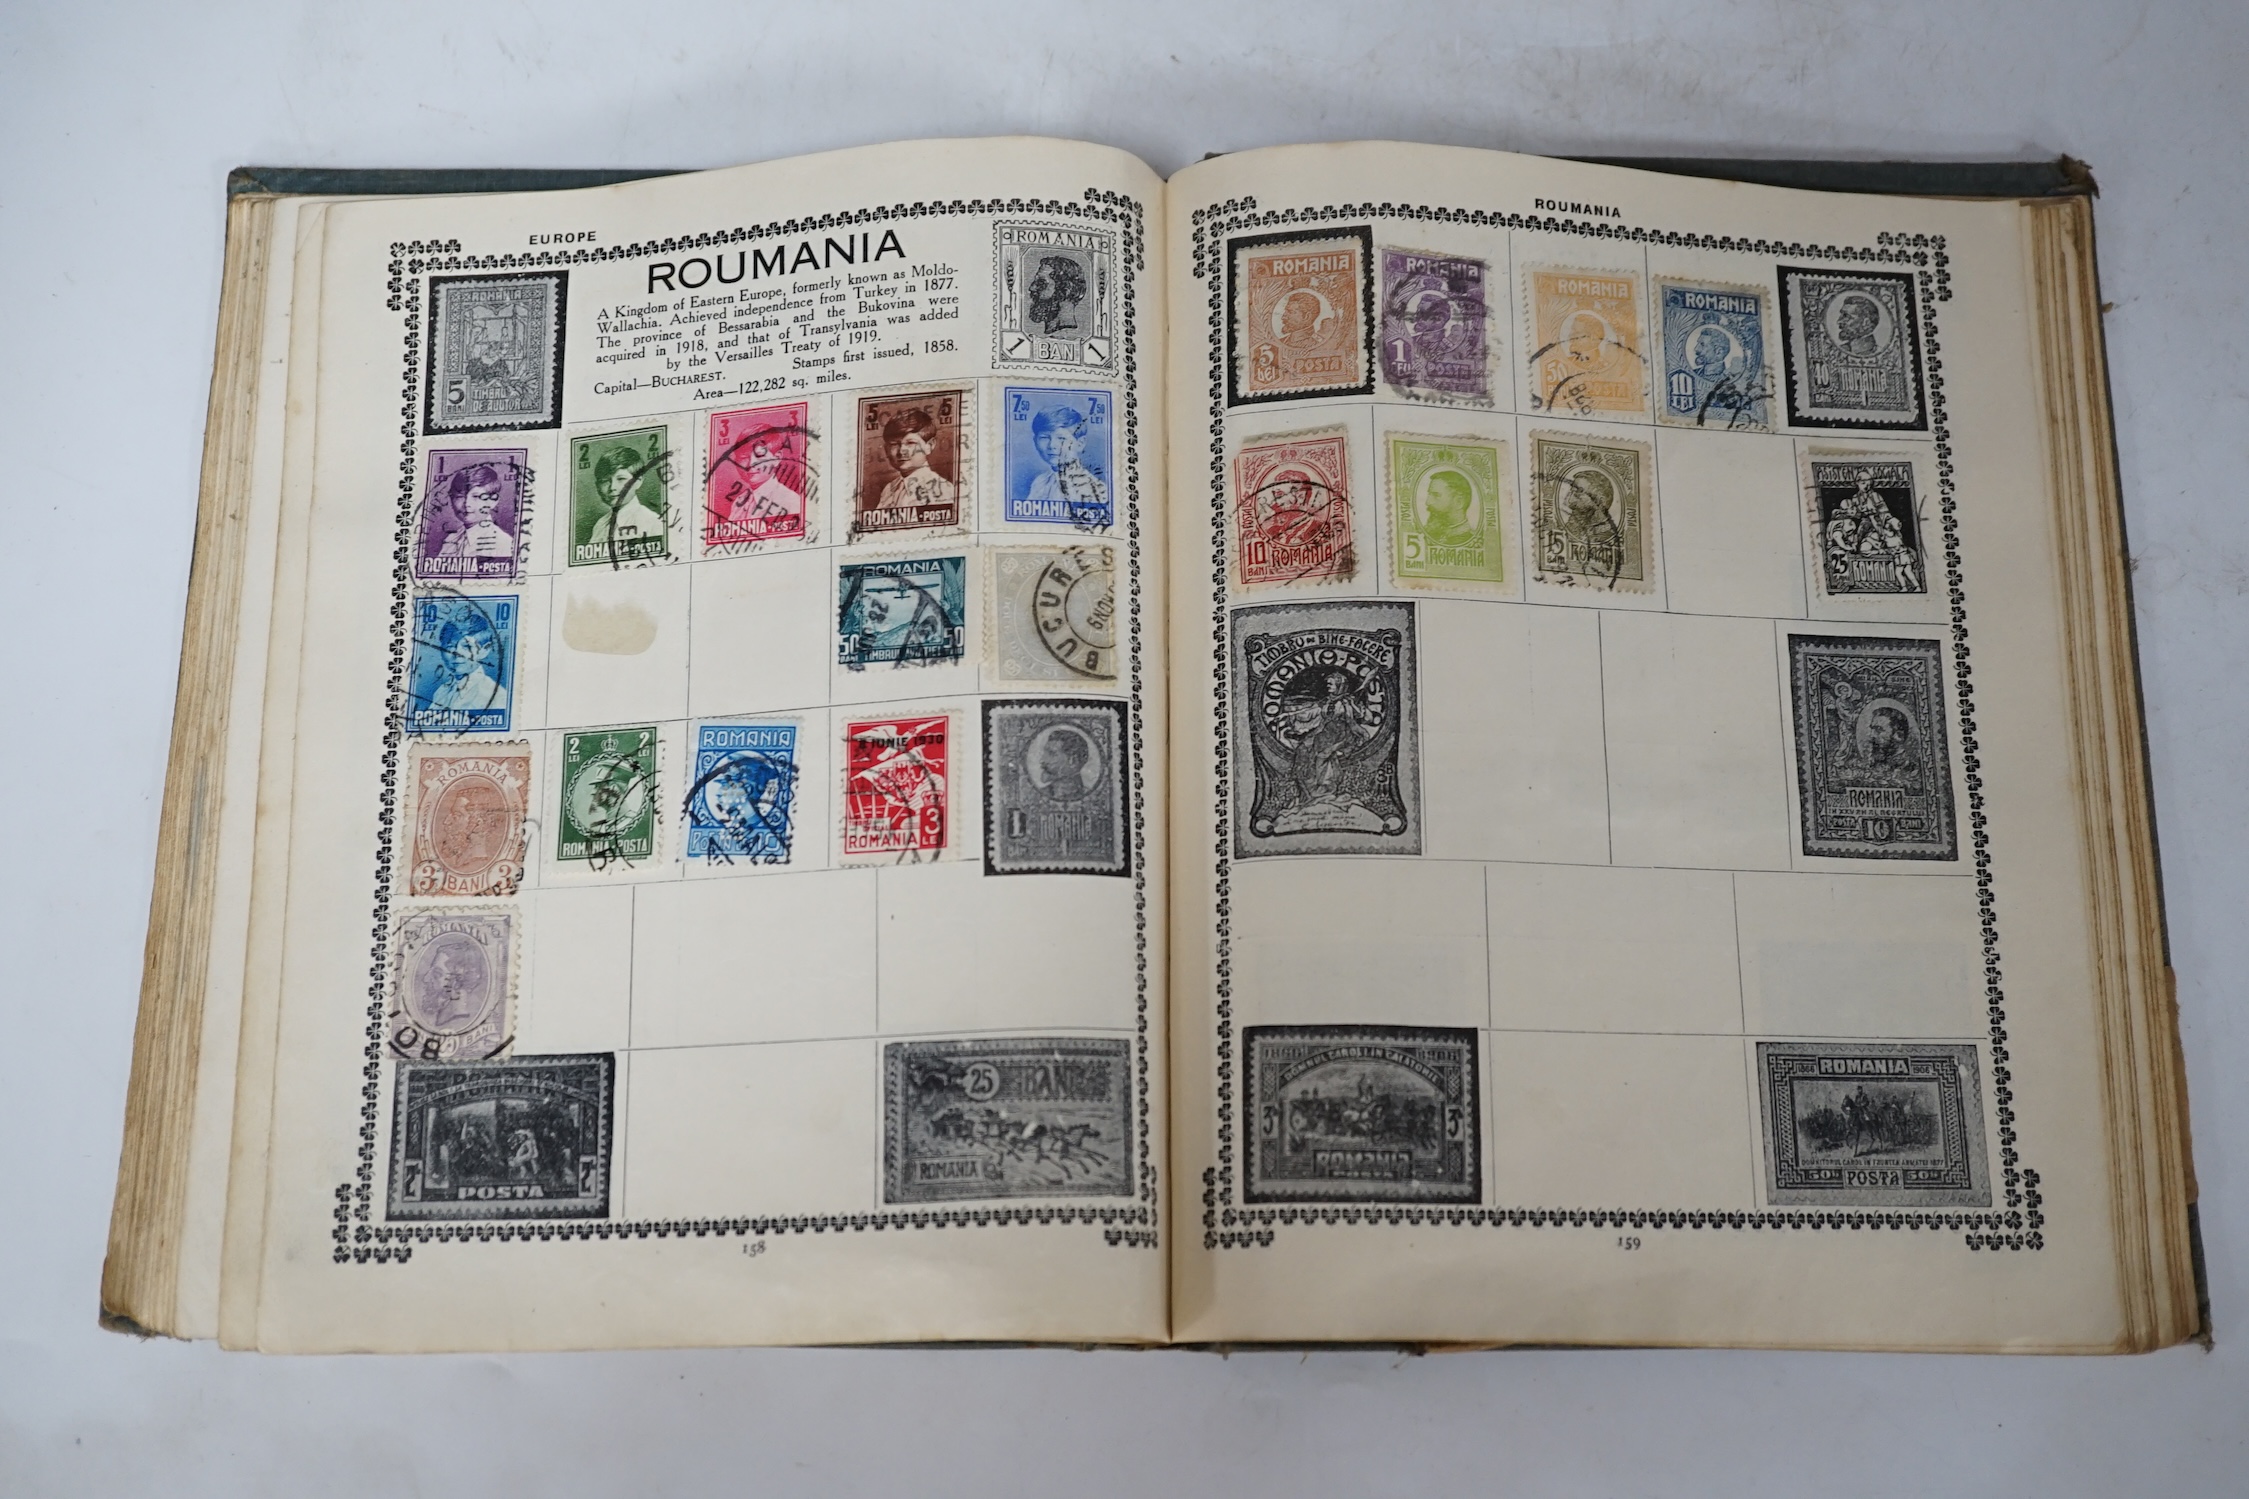 Two early 20th century Stamp Albums, containing a sparse accumulation of All World postage stamps, a 1d black and two 1d reds seen